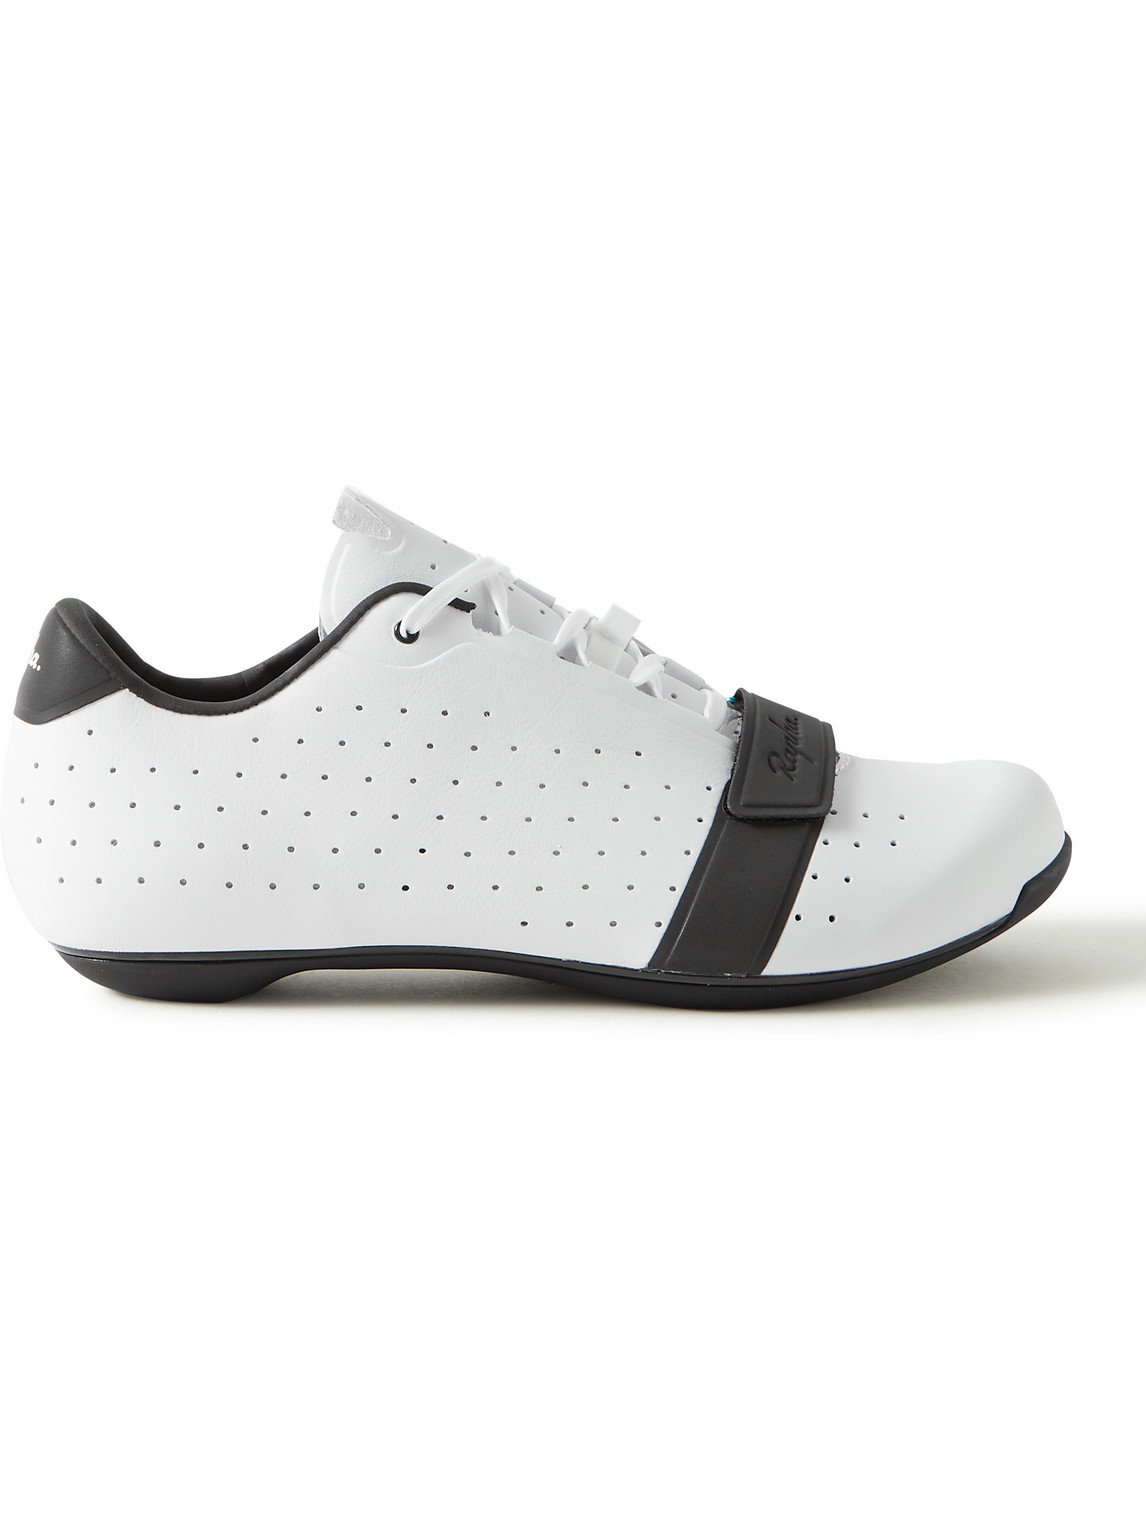 Rapha Classic Perforated Microfibre Cycling Shoes In White